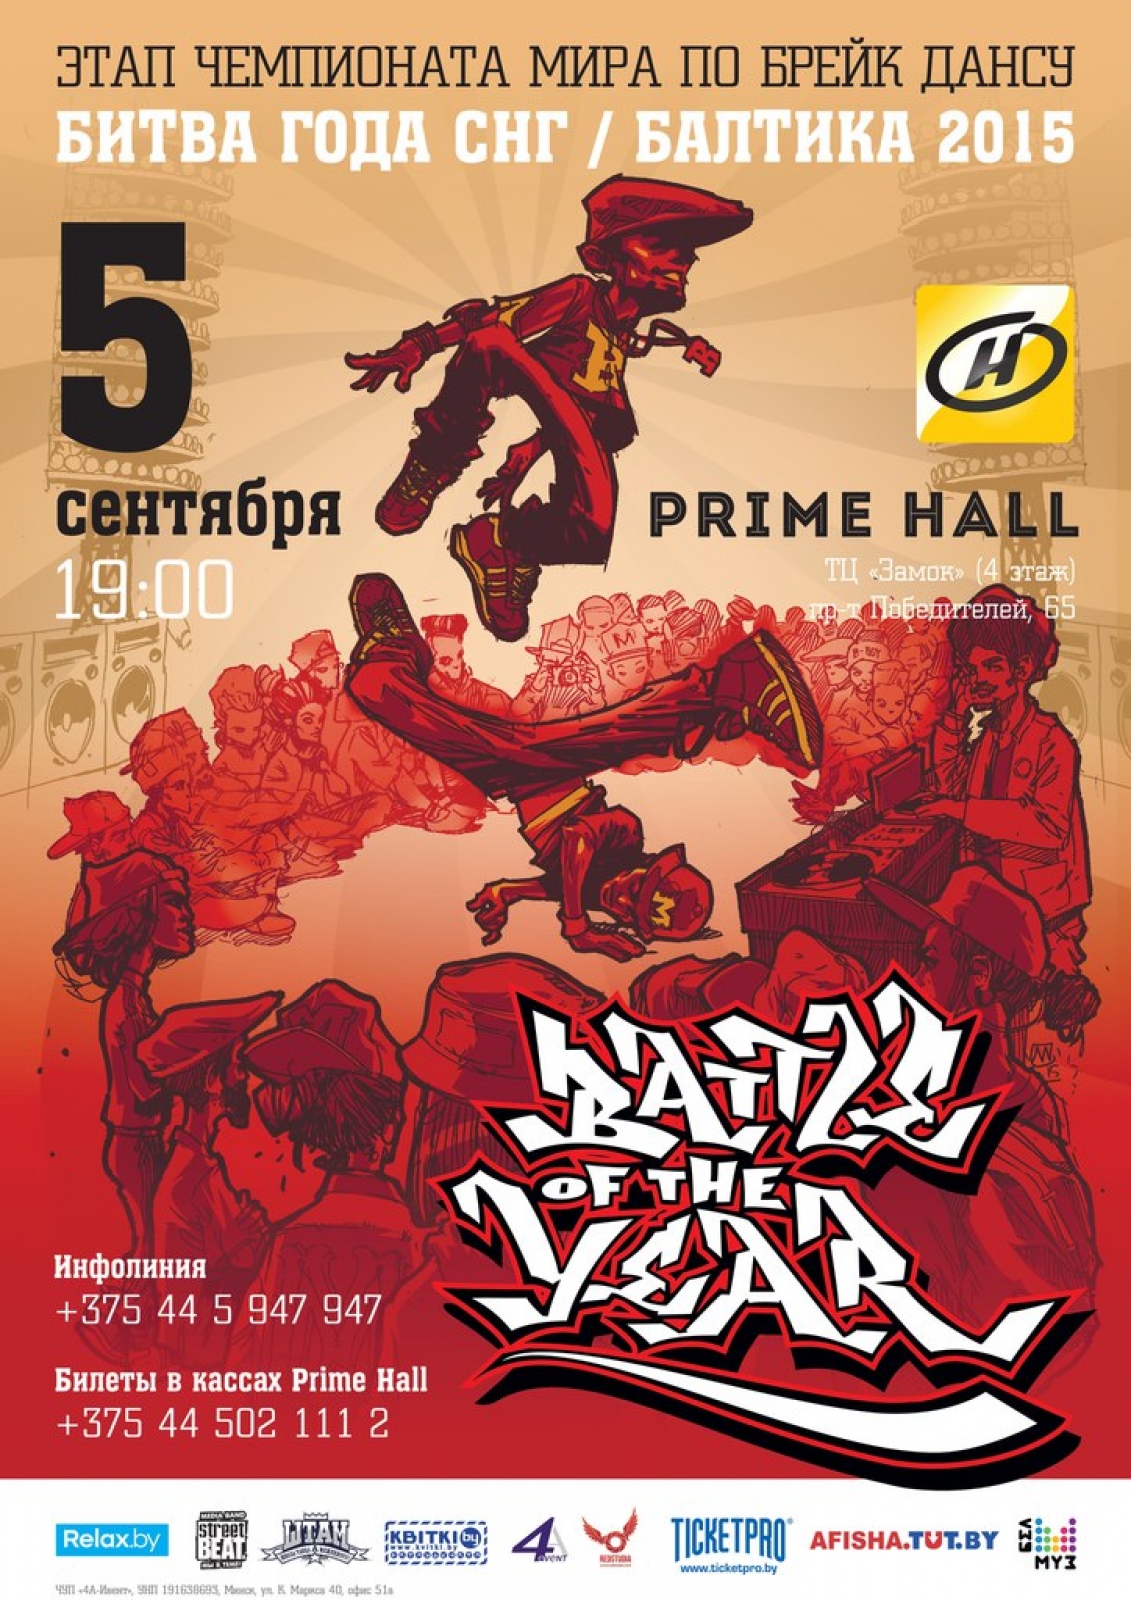 Battle Of The Year 2015 - СНГ / БАЛТИКА poster